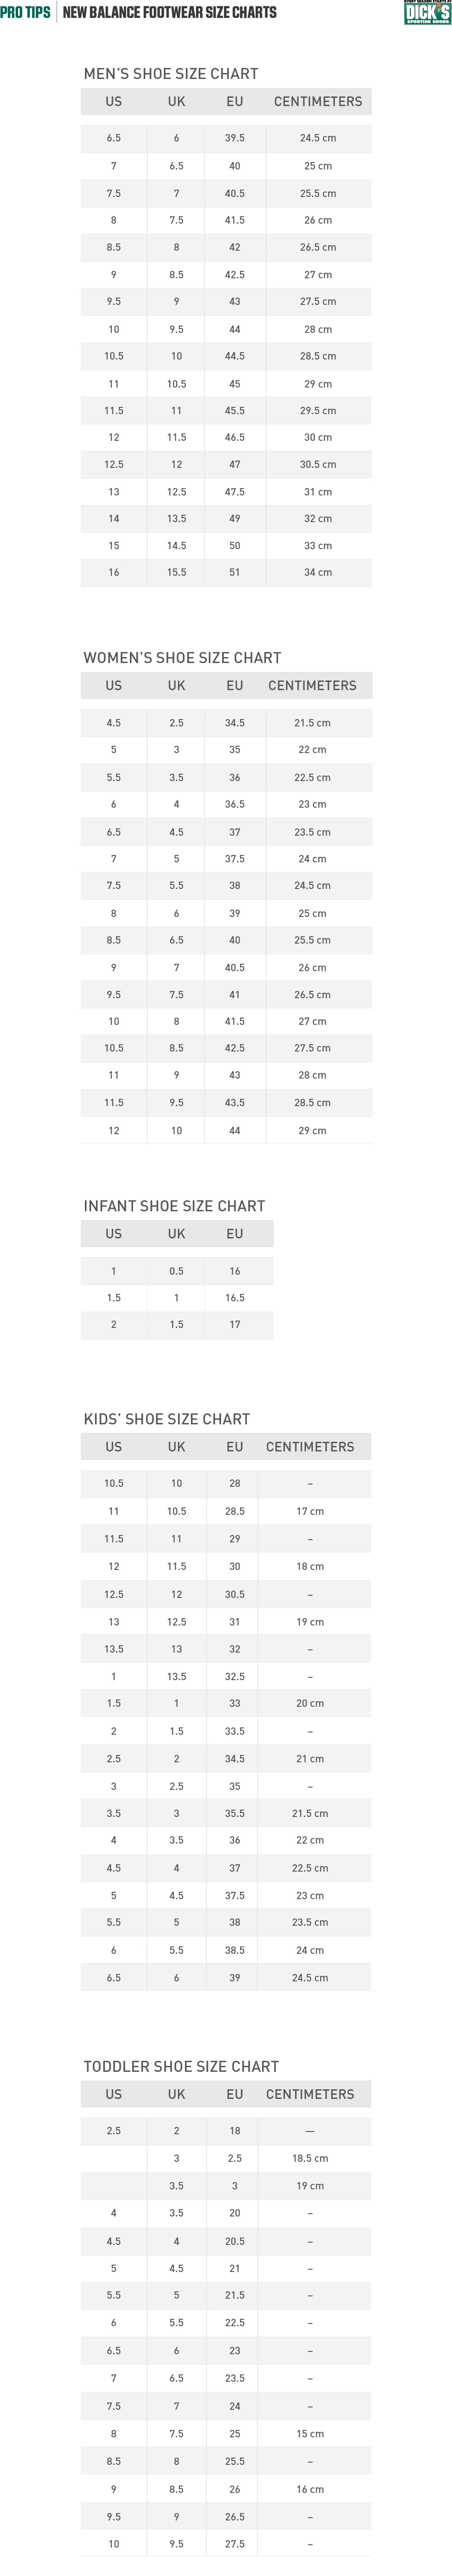 new-balance-footwear-size-charts-pro-tips-by-dick-s-sporting-goods